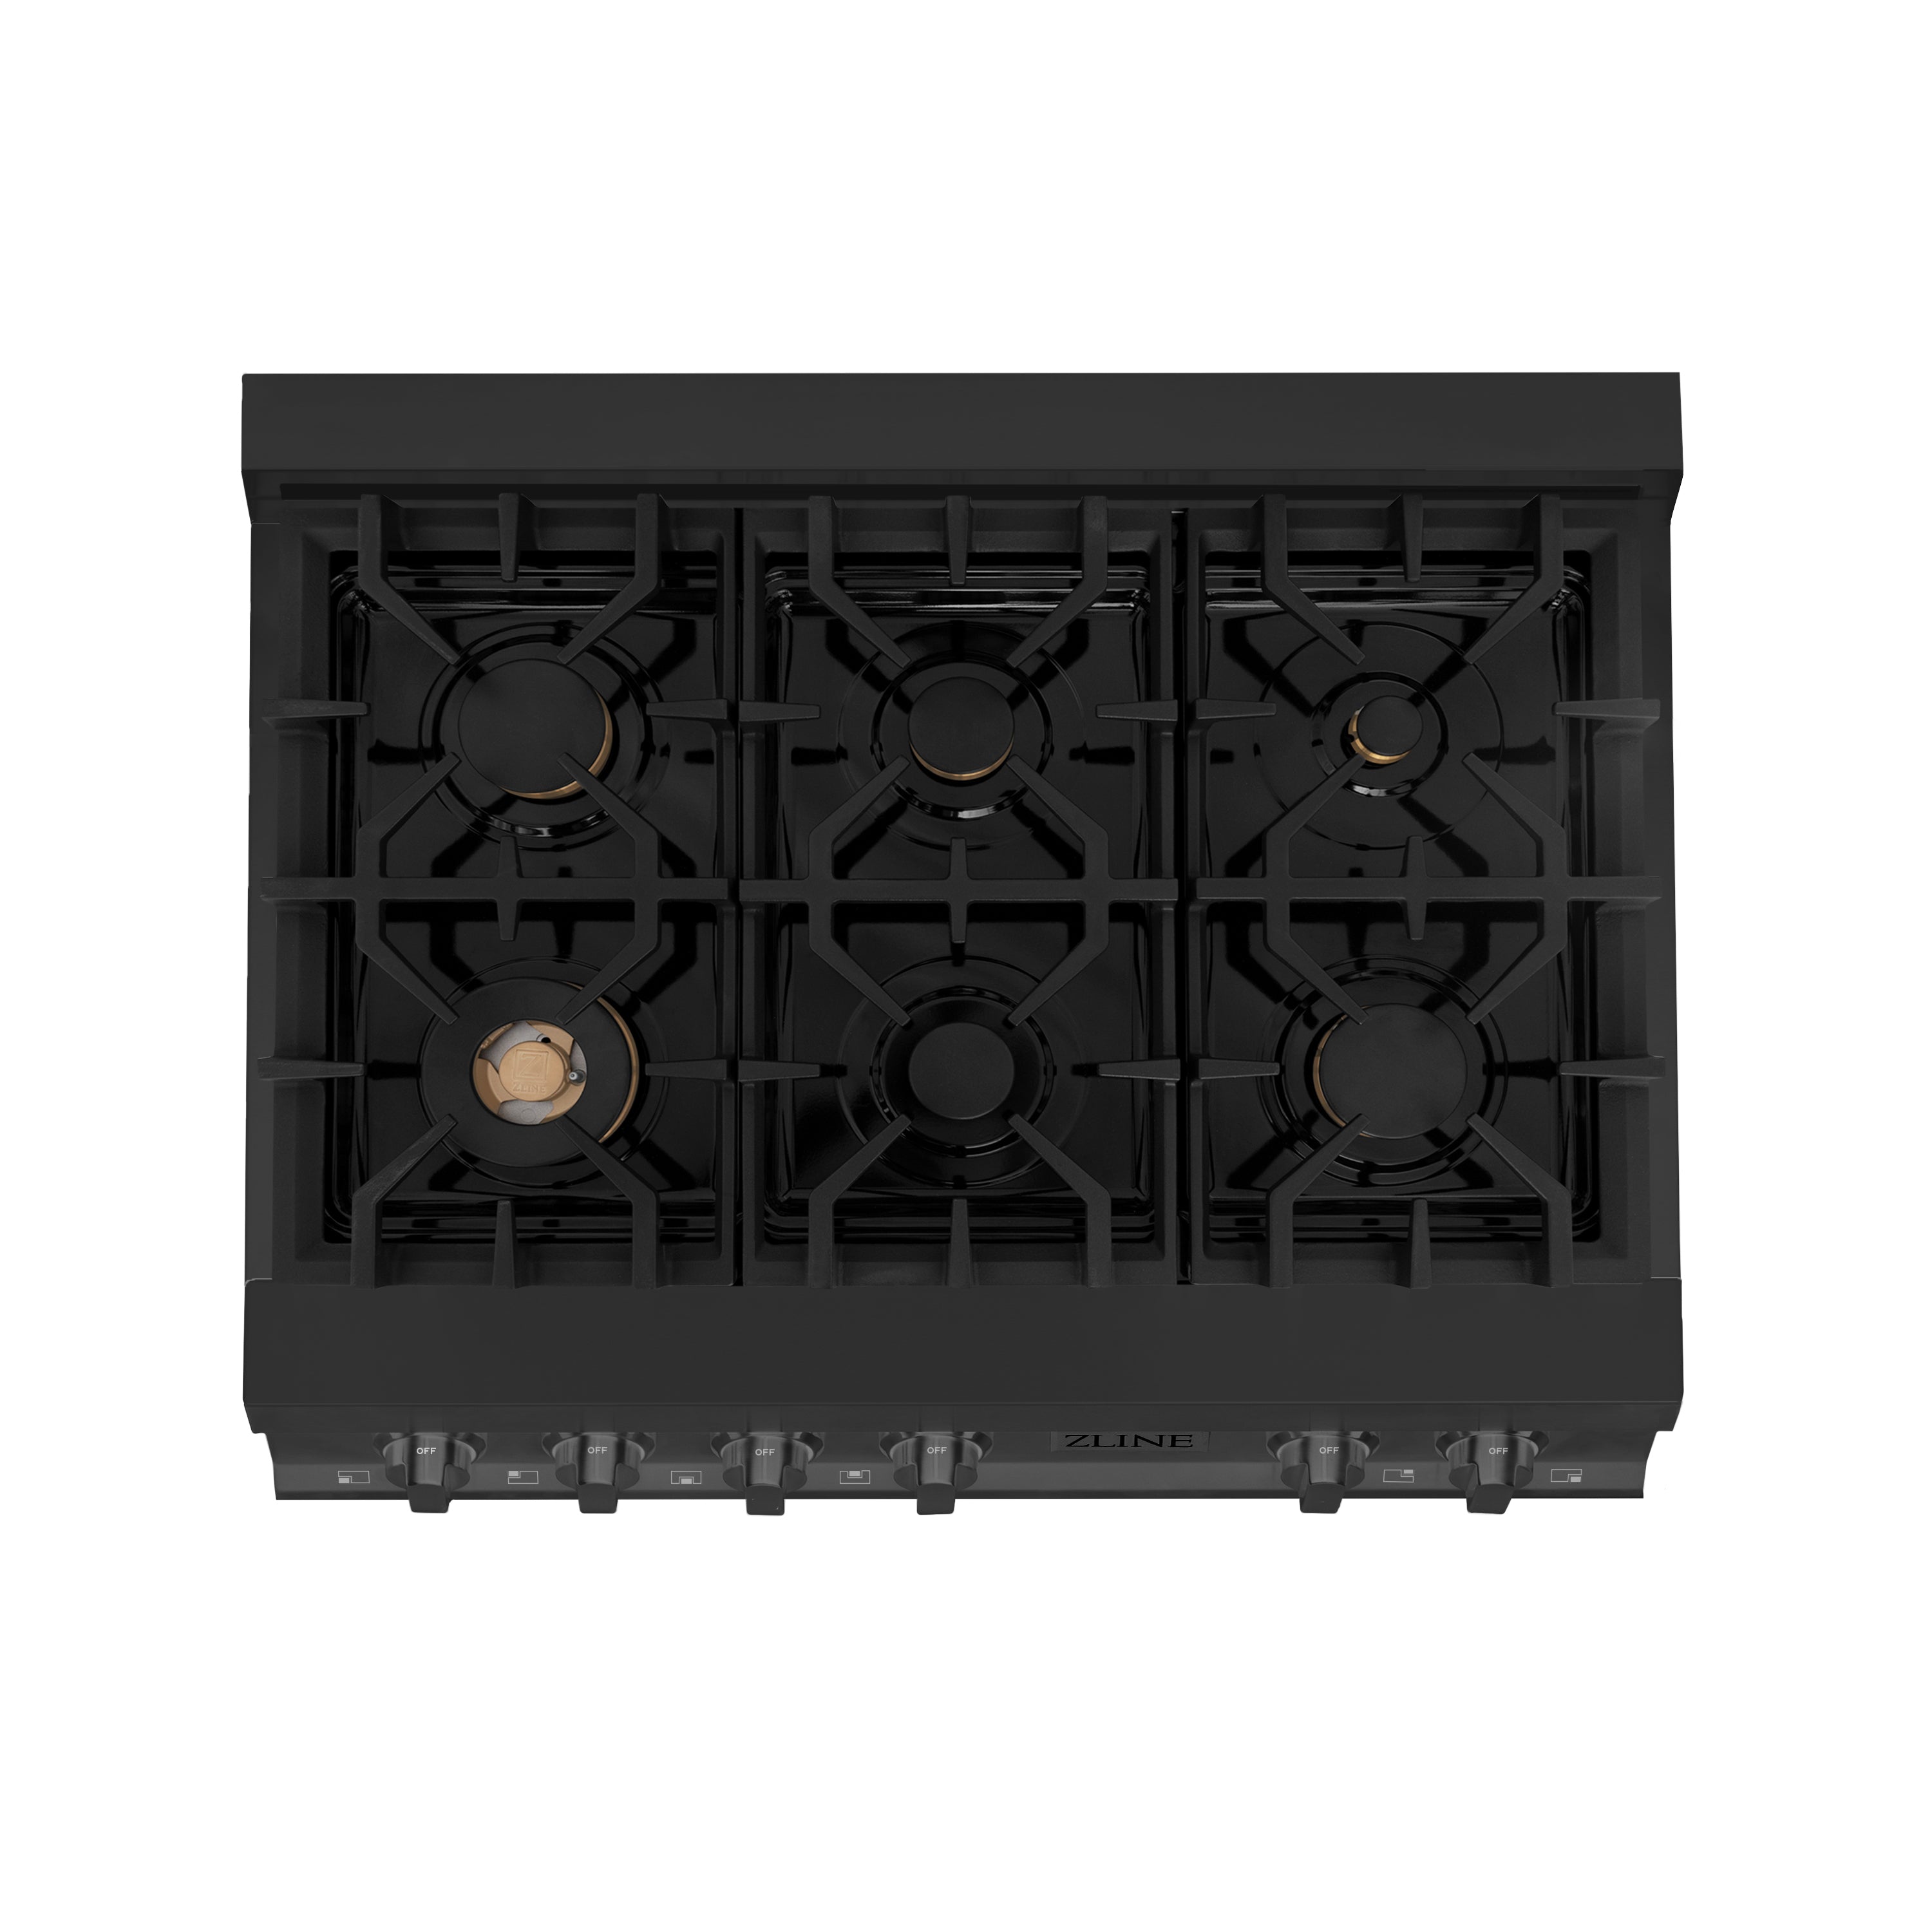 ZLINE 36" Porcelain Gas Stovetop in Black Stainless Steel with 6 Gas Brass Burners (RTB-BR-36)